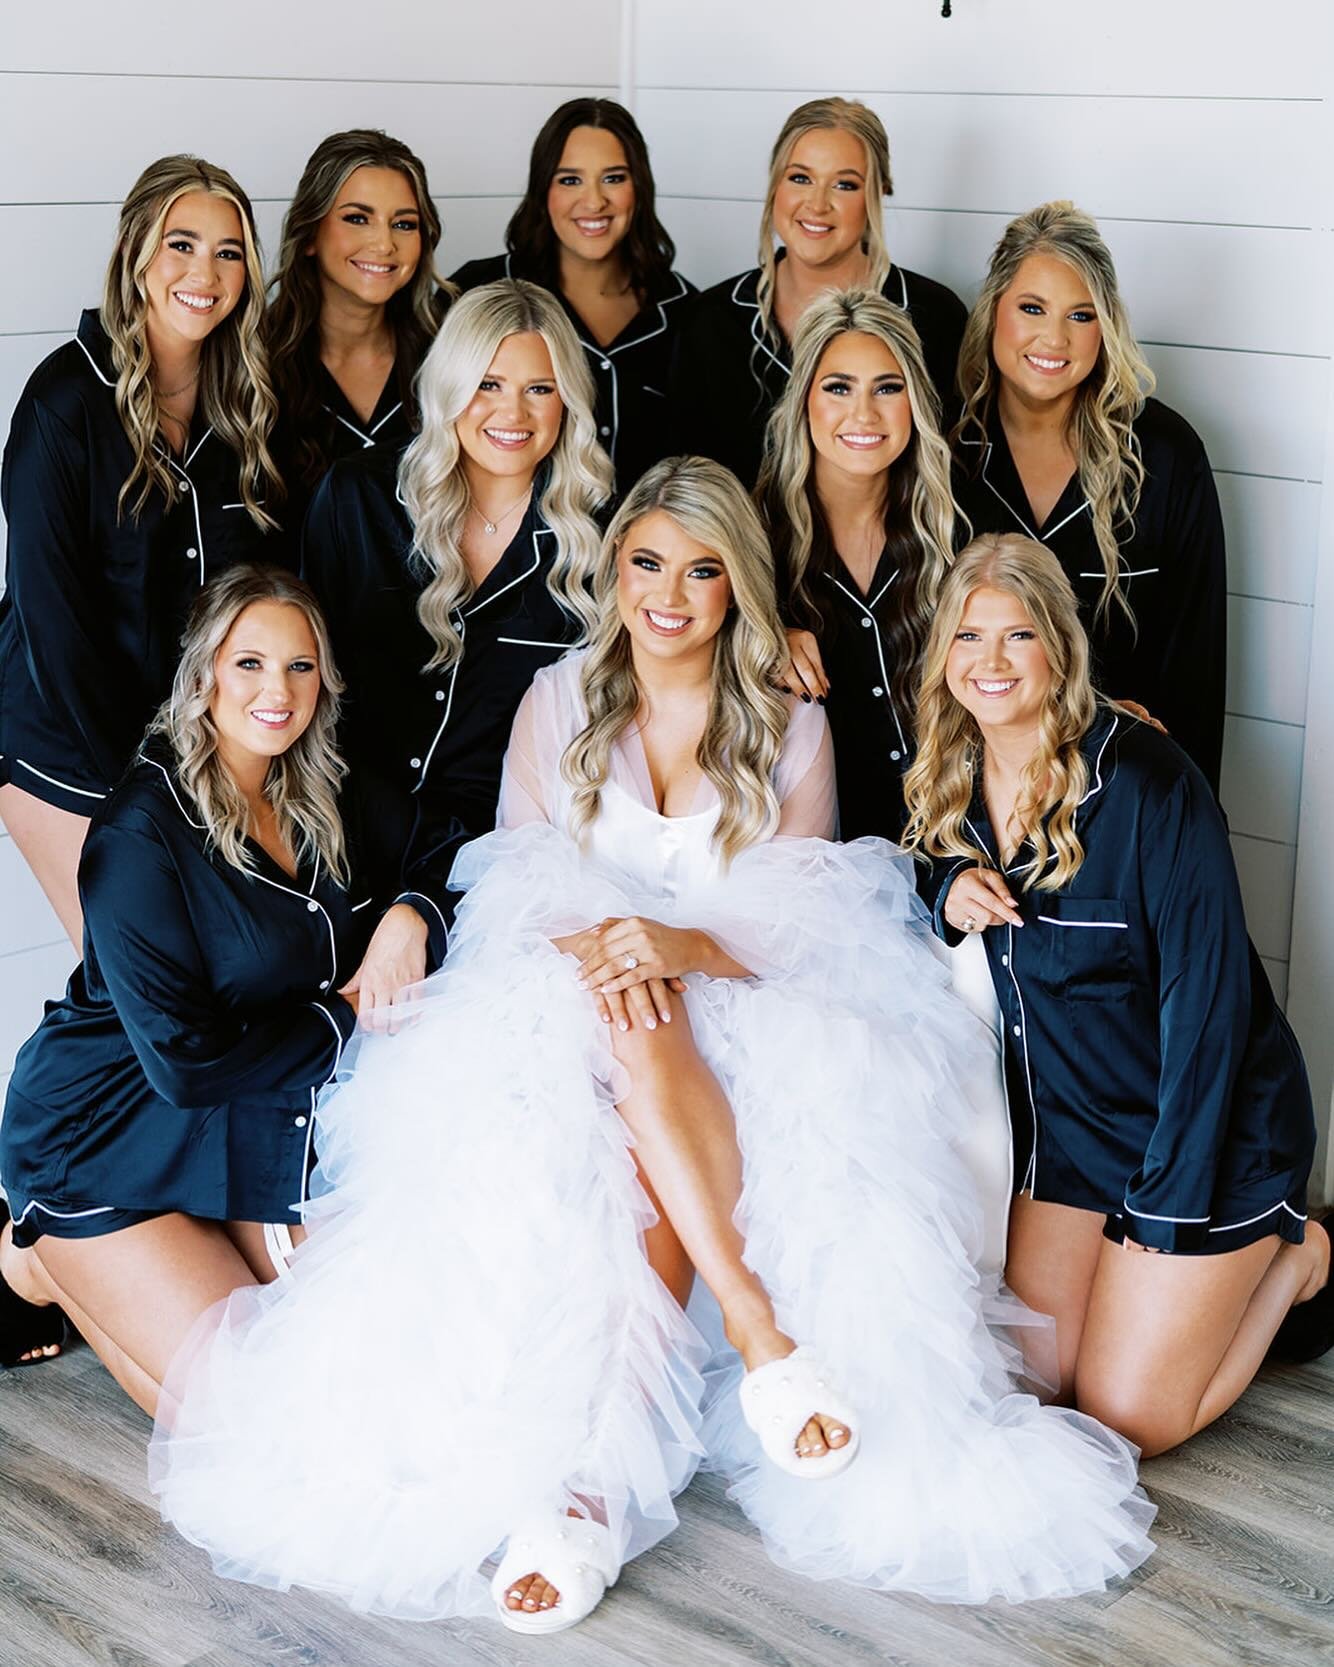 The most perfect group of bffs I ever did see!!! I Loved seeing so many familiar faces!!! 🖤 

Get your girls and book your dream glam for your big day &amp; Enjoy the experience!! ✨✨✨

Hair: @hairbysam.d 
Venue: @thefarmhouseevents 
Photo: @katygran